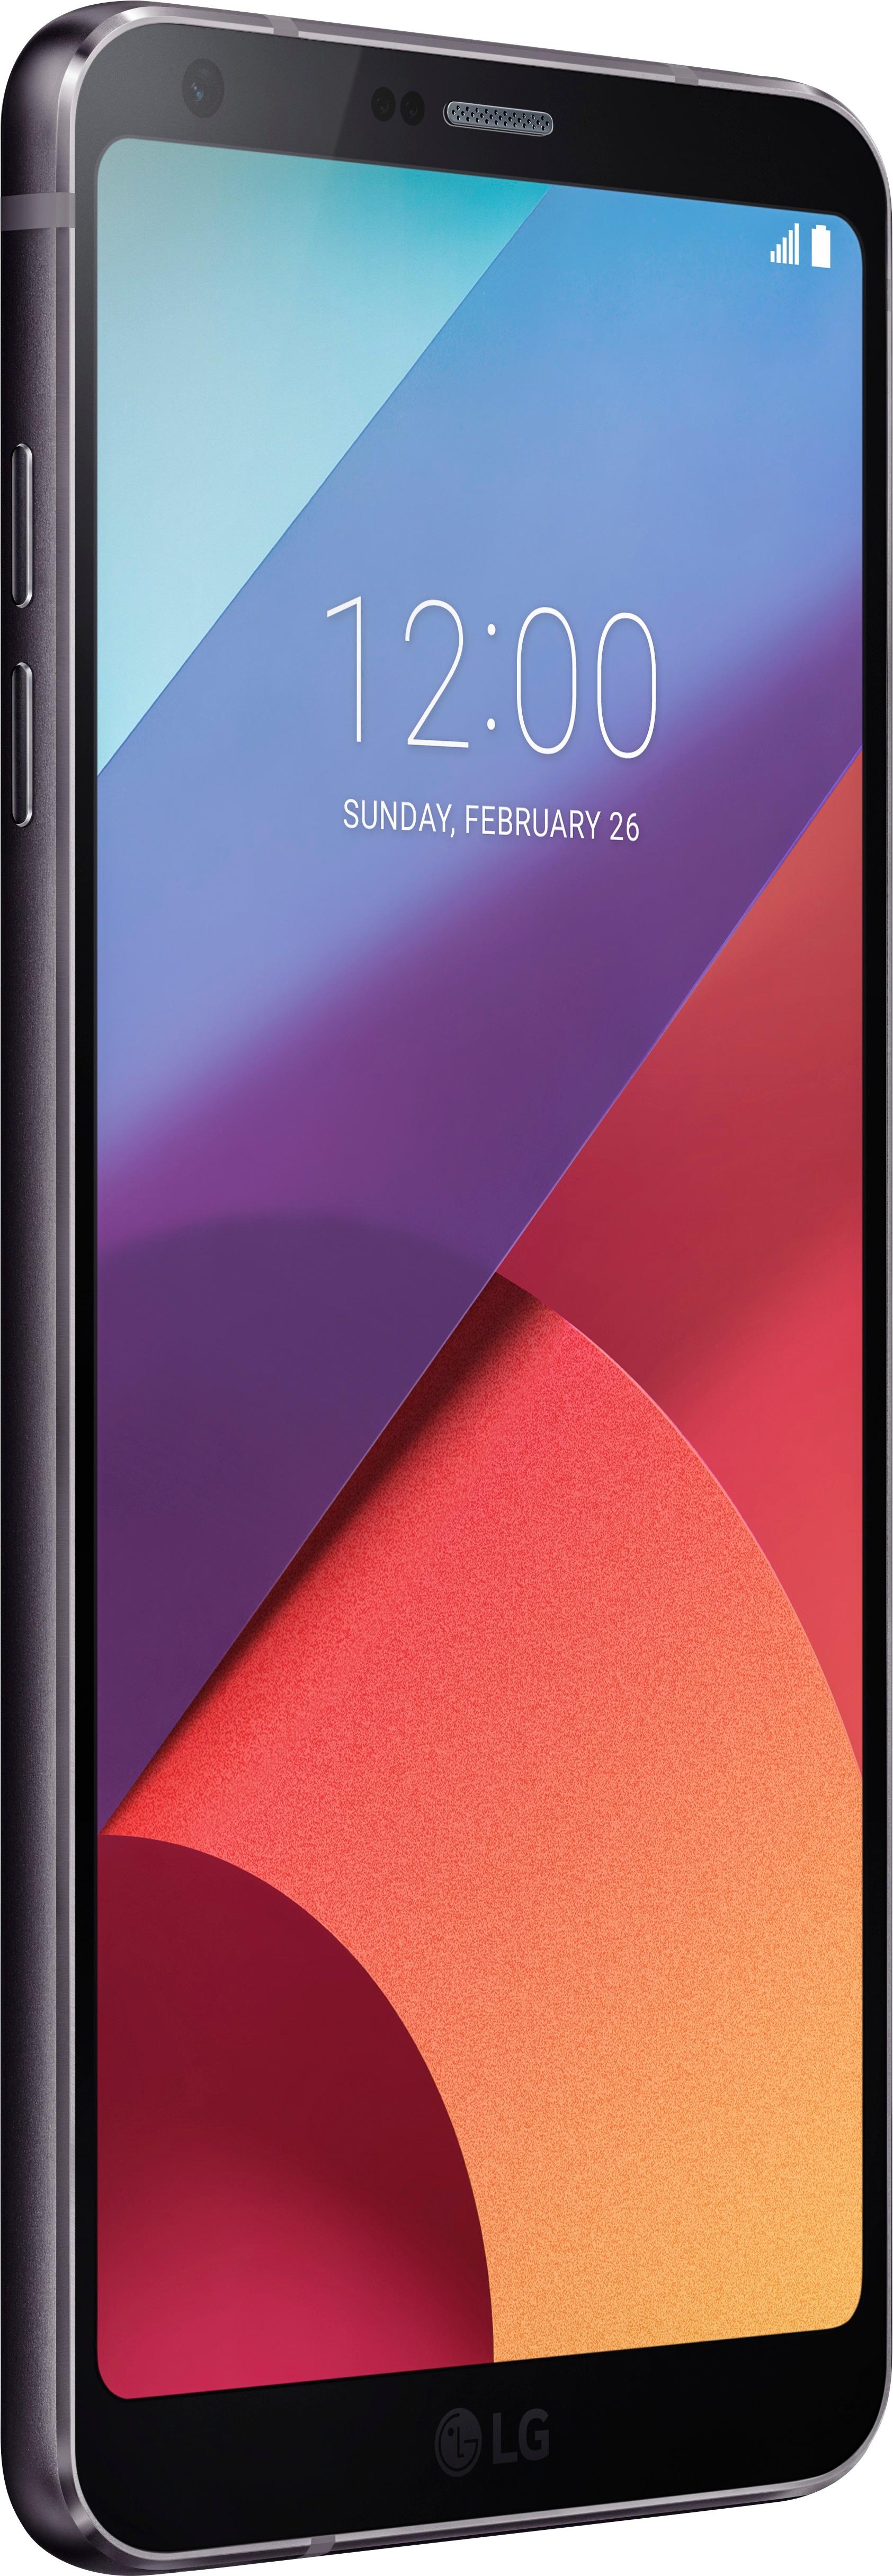 Best Buy: LG G6+ US997U 4G LTE with 128GB Memory Cell Phone (Unlocked ...